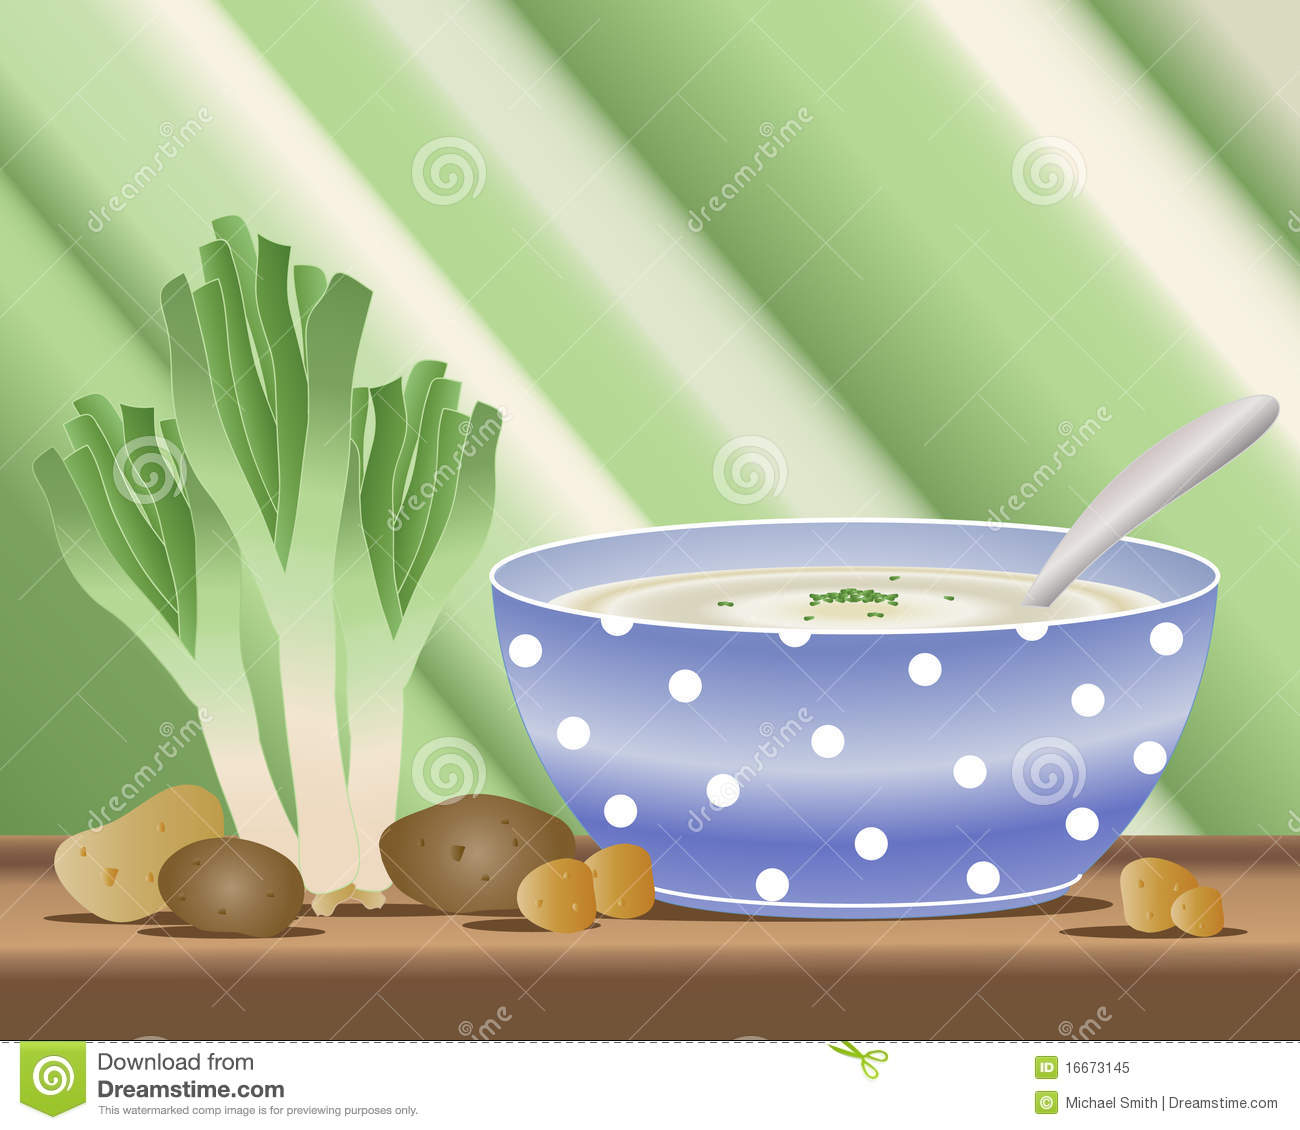 An Illustration Of A Bowl Of Potato And Leek Soup With Fresh Leeks And